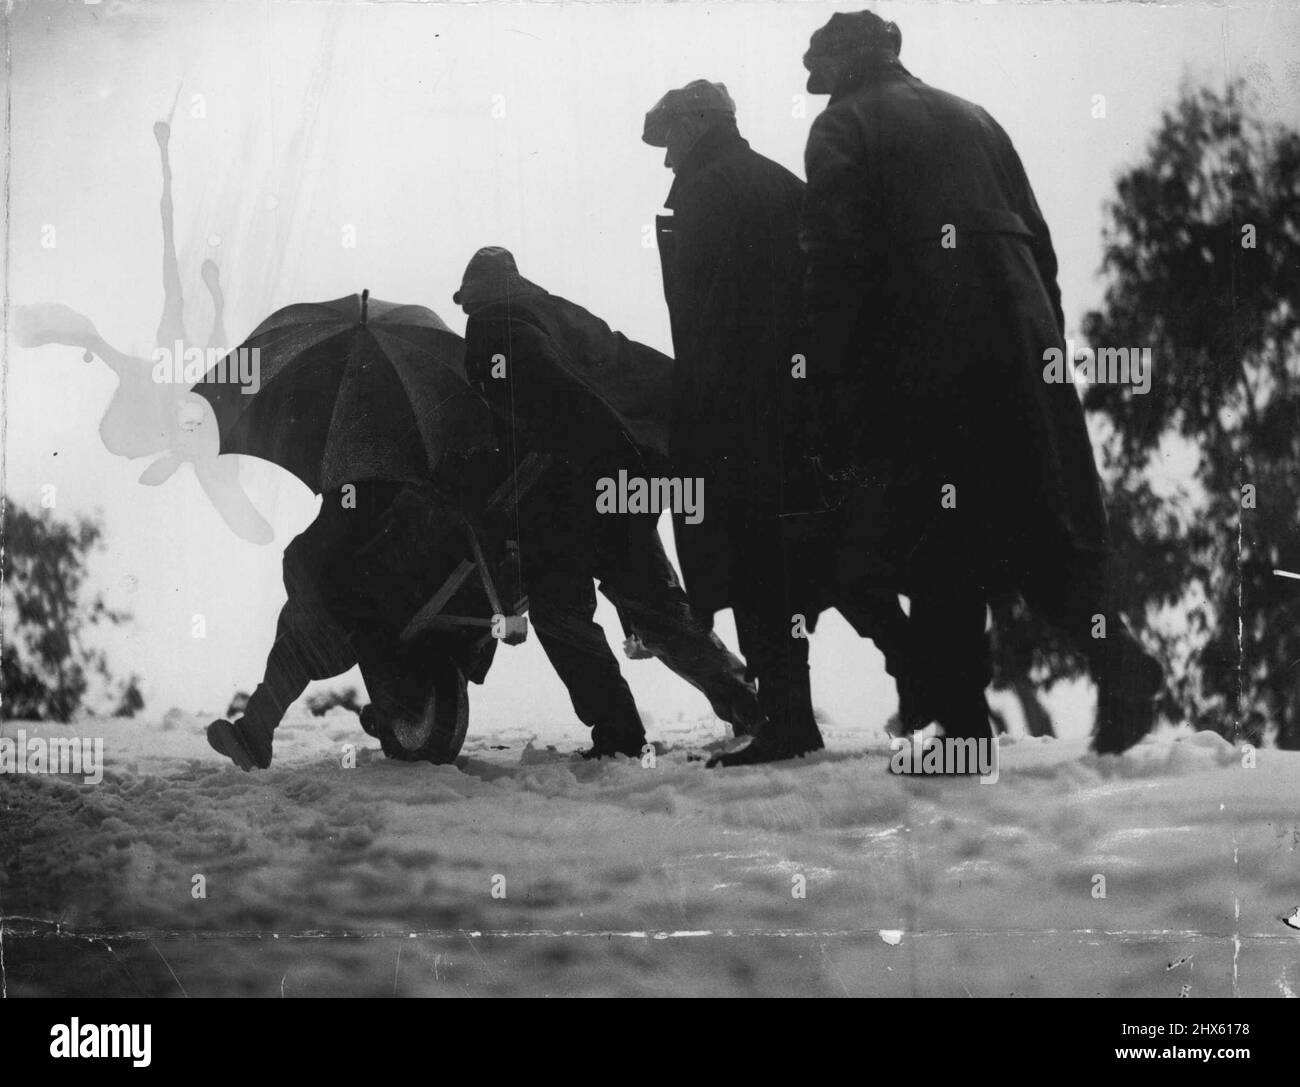 Barrow Gang Plods Through Buffalo Snow - Trudging upward on the heights of Mount Buffalo, the barrowmen, with their trainers following in single file, are shown making slow progress through the heavy snow which has another handicap to the pusher's task. July 1, 1935.;Barrow Gang Plods Through Buffalo Snow - Trudging upward on the heights of Mount Buffalo, the barrowmen, with their trainers following in single file, are shown making slow progress through the heavy snow which has another handicap Stock Photo